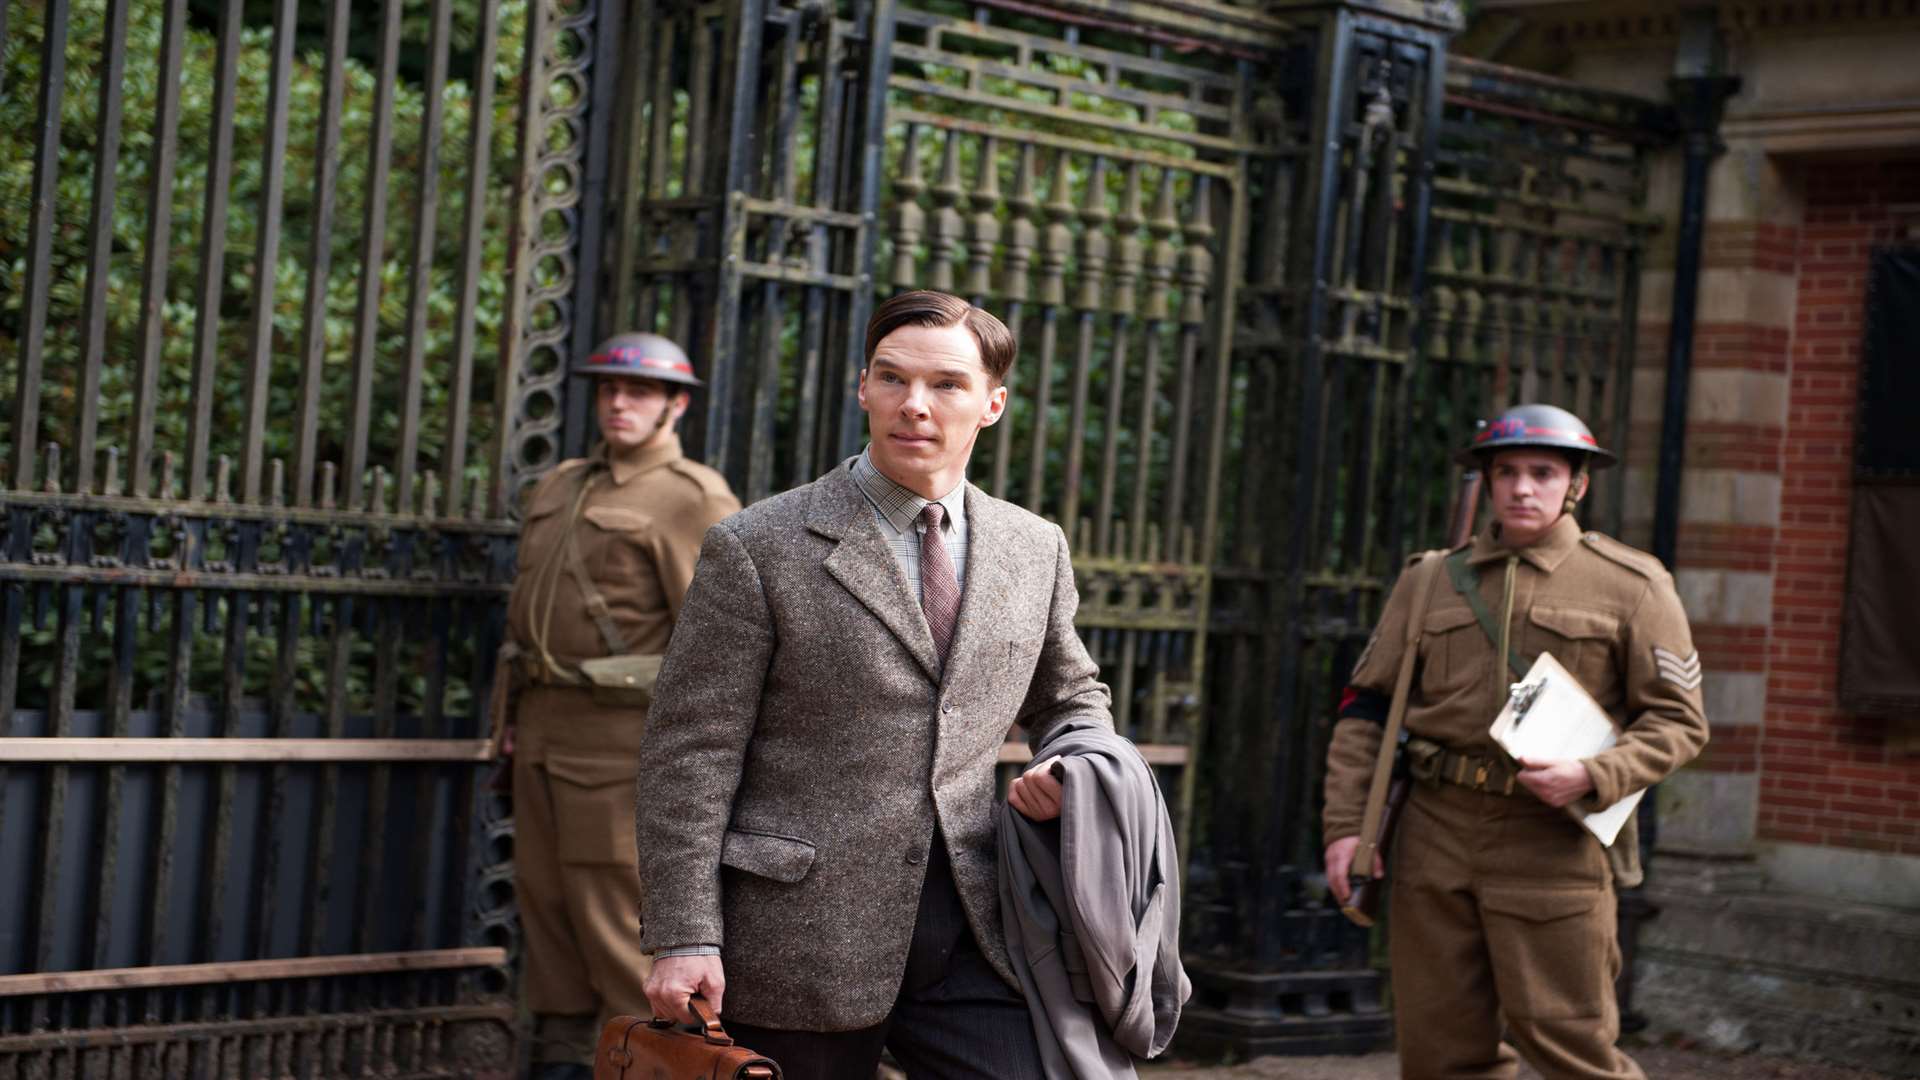 The Imitation Game, with Benedict Cumberbatch as Alan Turing. Picture: PA Photo/Handout/Studio Canal